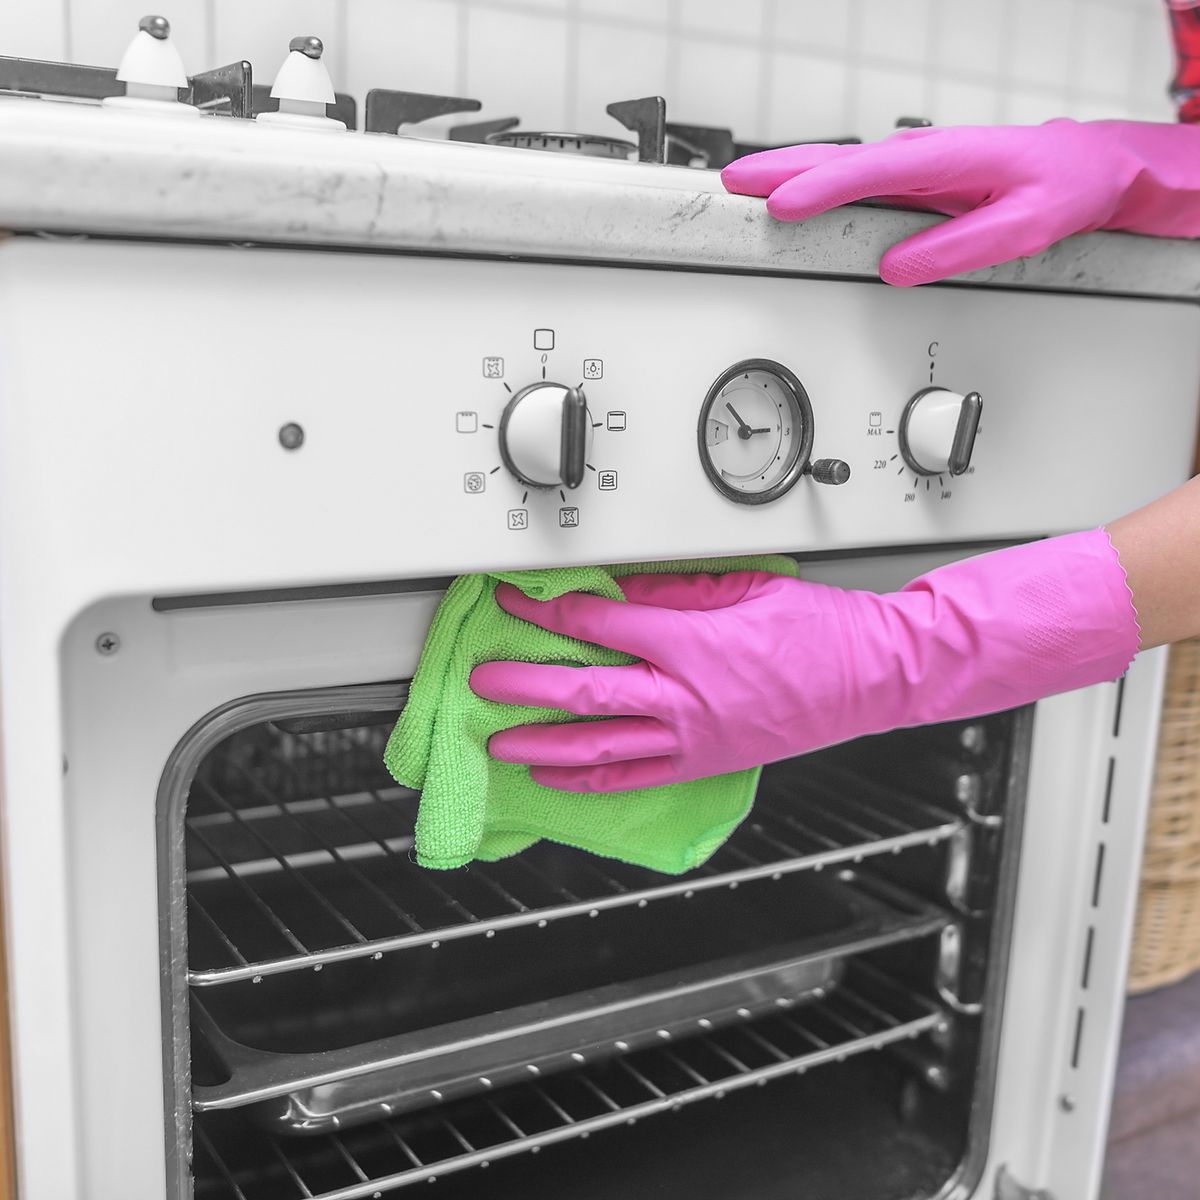 How to Use a Self-Cleaning Oven